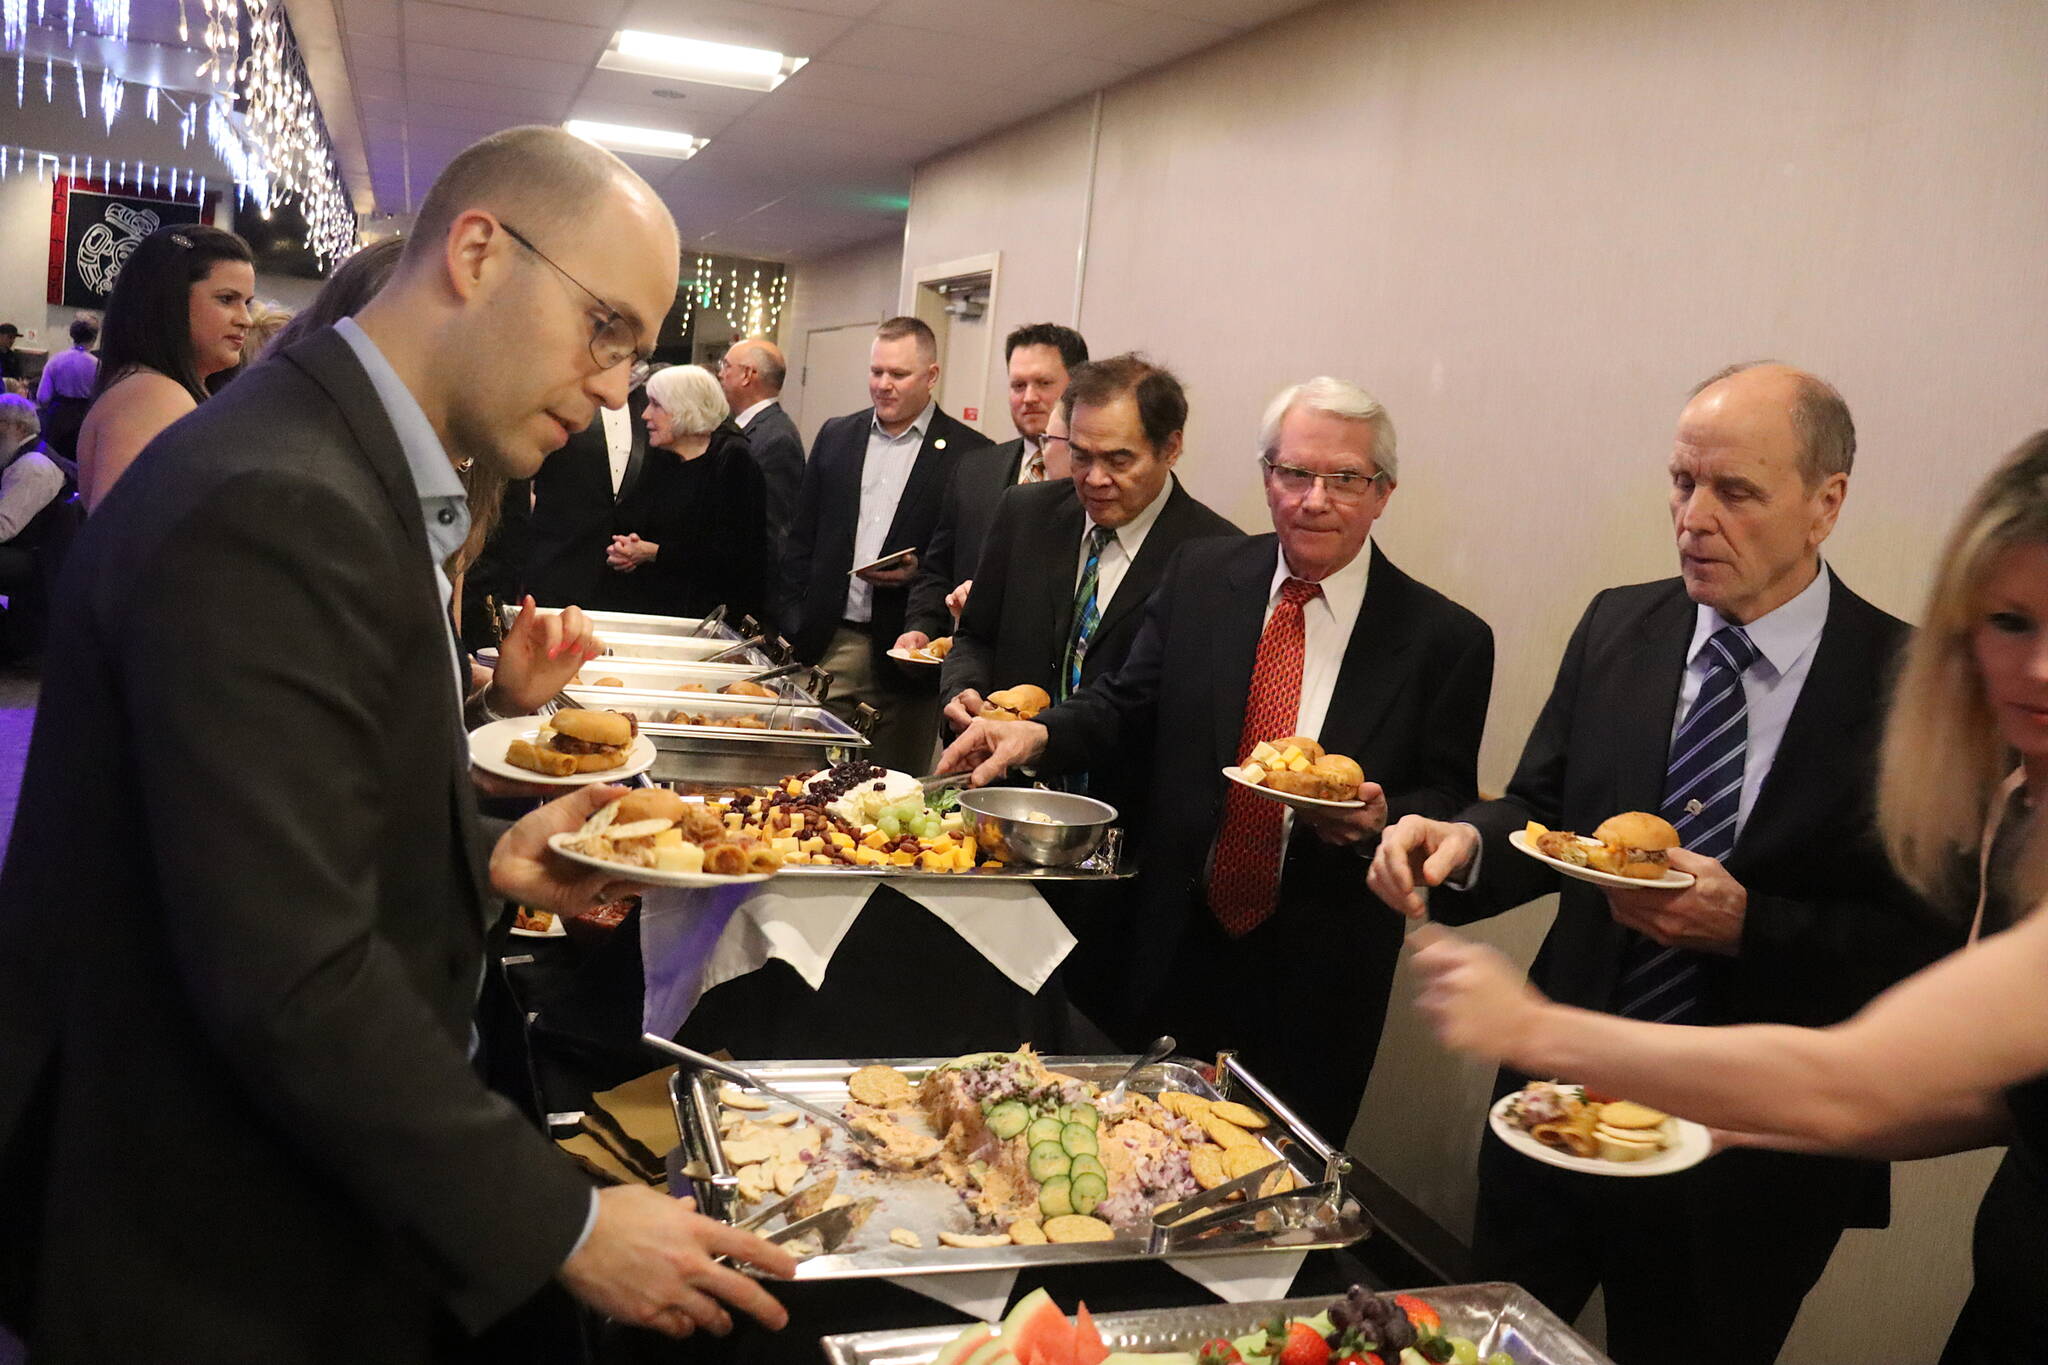 Supporters of Gov. Mike Dunleavy, along with state lawmakers in both political parties, line up at the buffet at the inaugural celebration for the governor on Friday at Elizabeth Peratrovich Hall. (Mark Sabbatini / Juneau Empire)